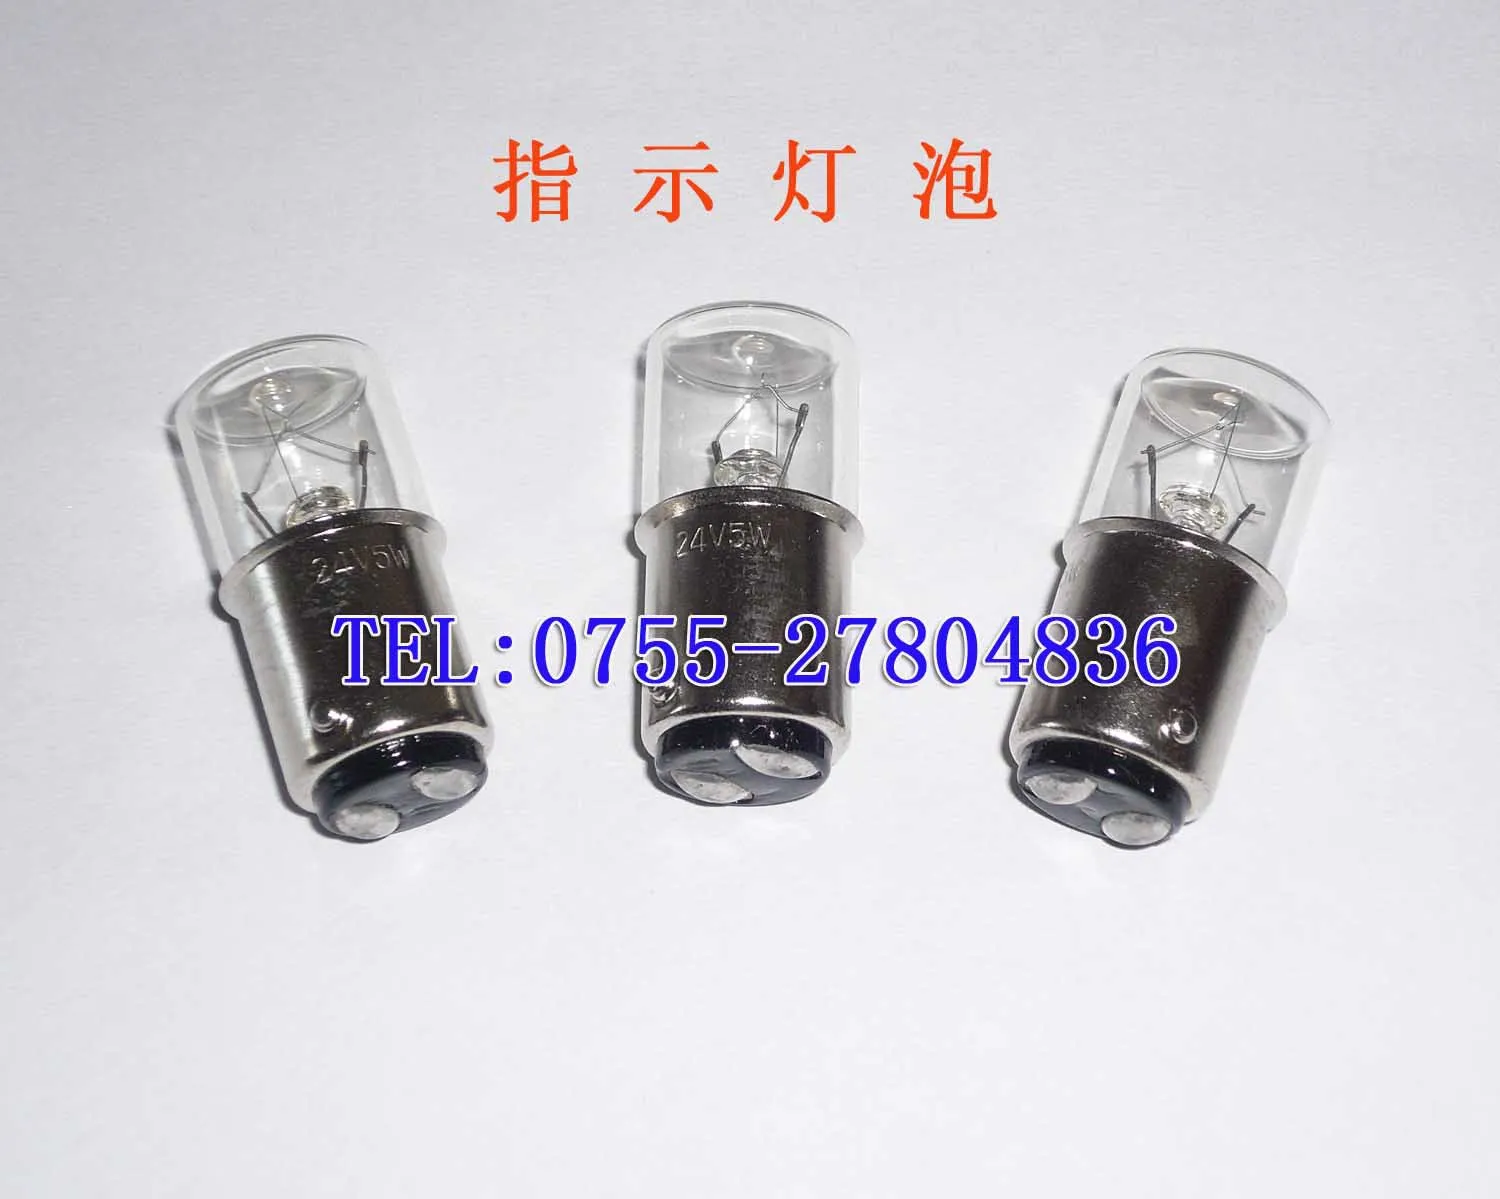 

2024 New Sale Transparent Tungsten Halogen Lamp Lampara Piloto Indicator Bulb Instrument Double Contact 24v5w 16 36mm